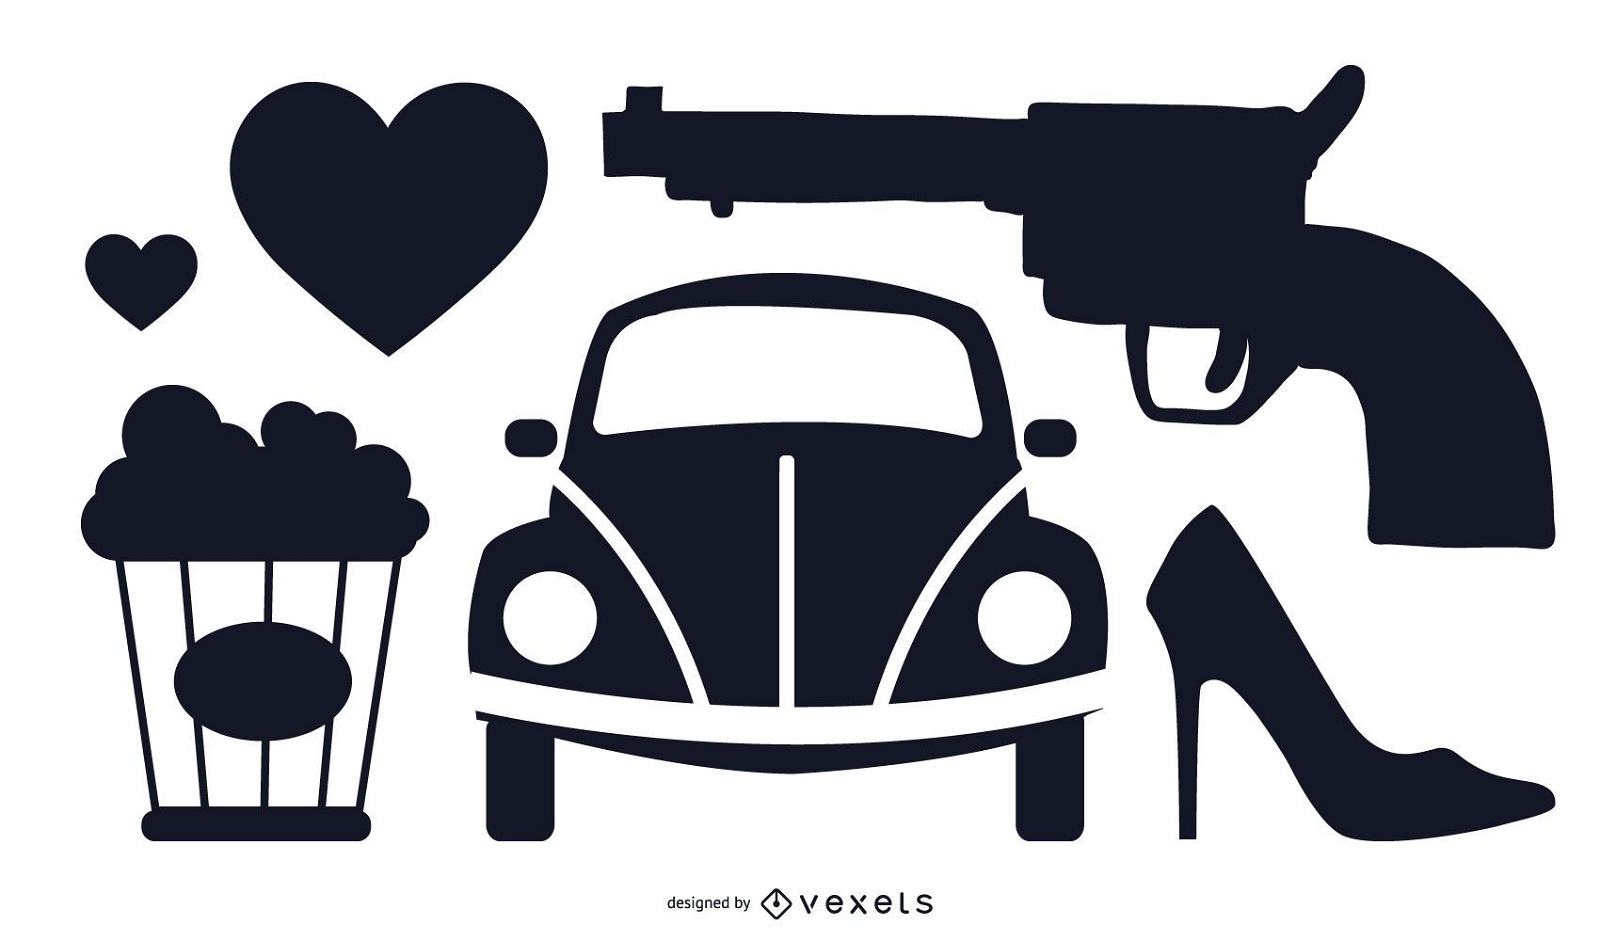  Free vector set with of several  cargunshoe popcorn love hearts objects